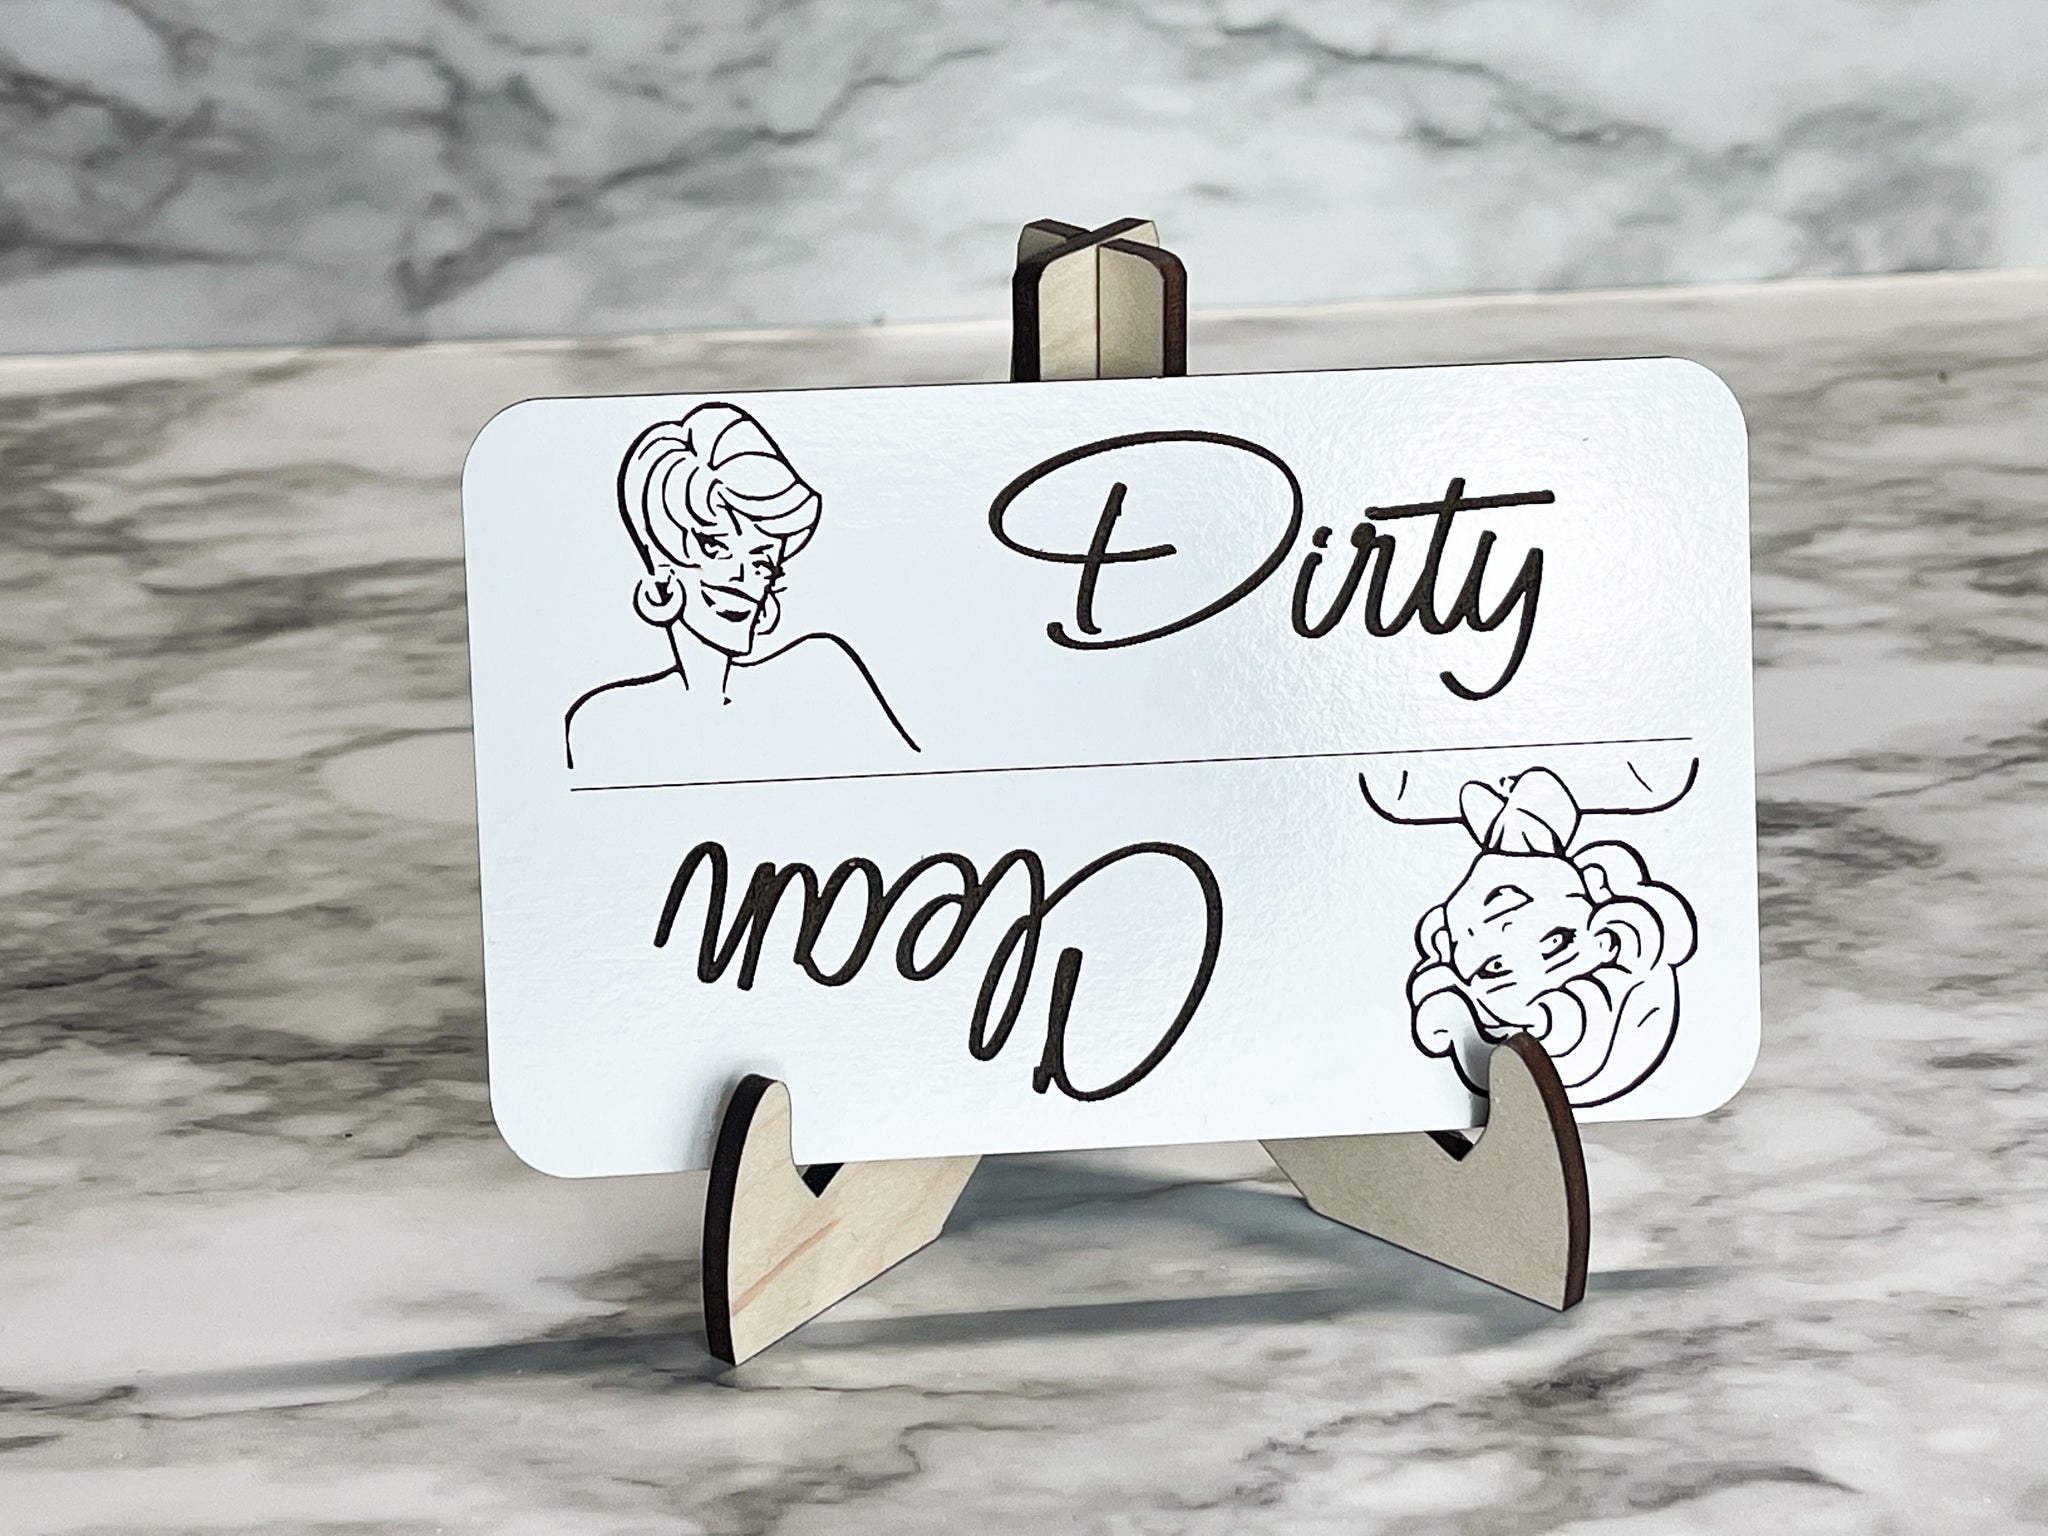 Dirty/Clean Dishwasher Magnet - Rose and Blanche - The Golden